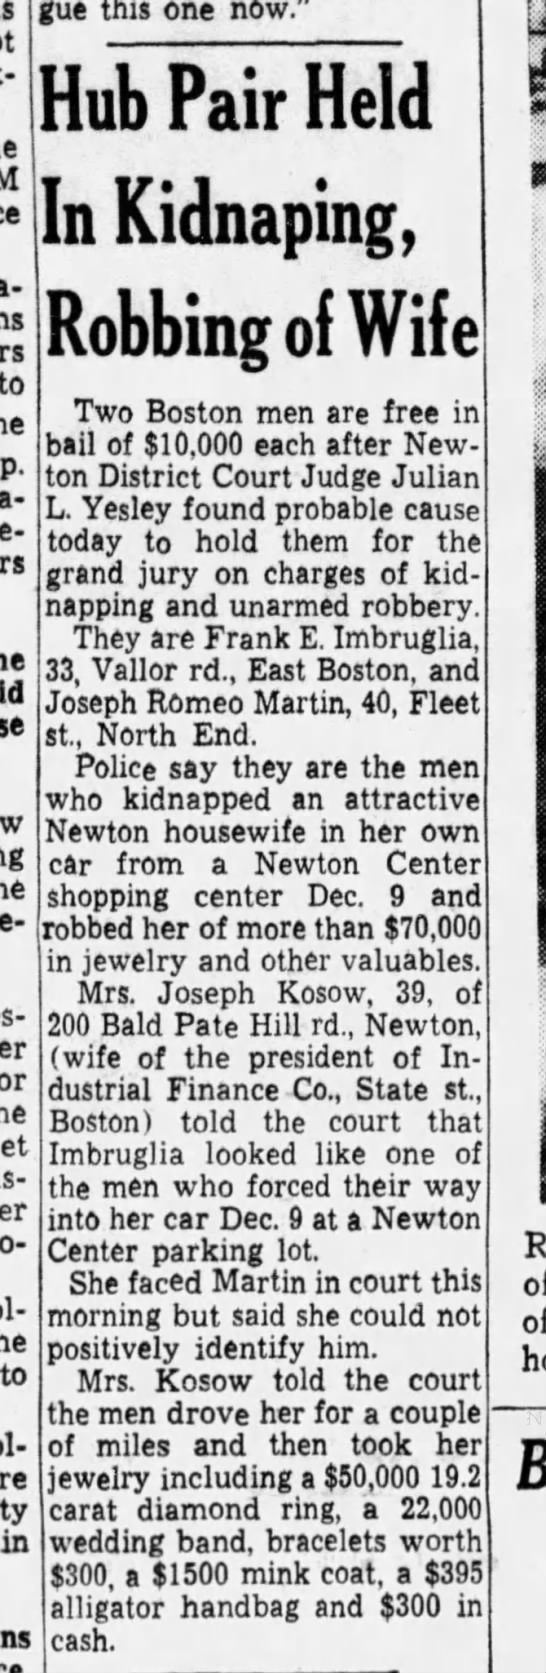 Romeo Martin arrested for kidnapping (Jan 1965) - 